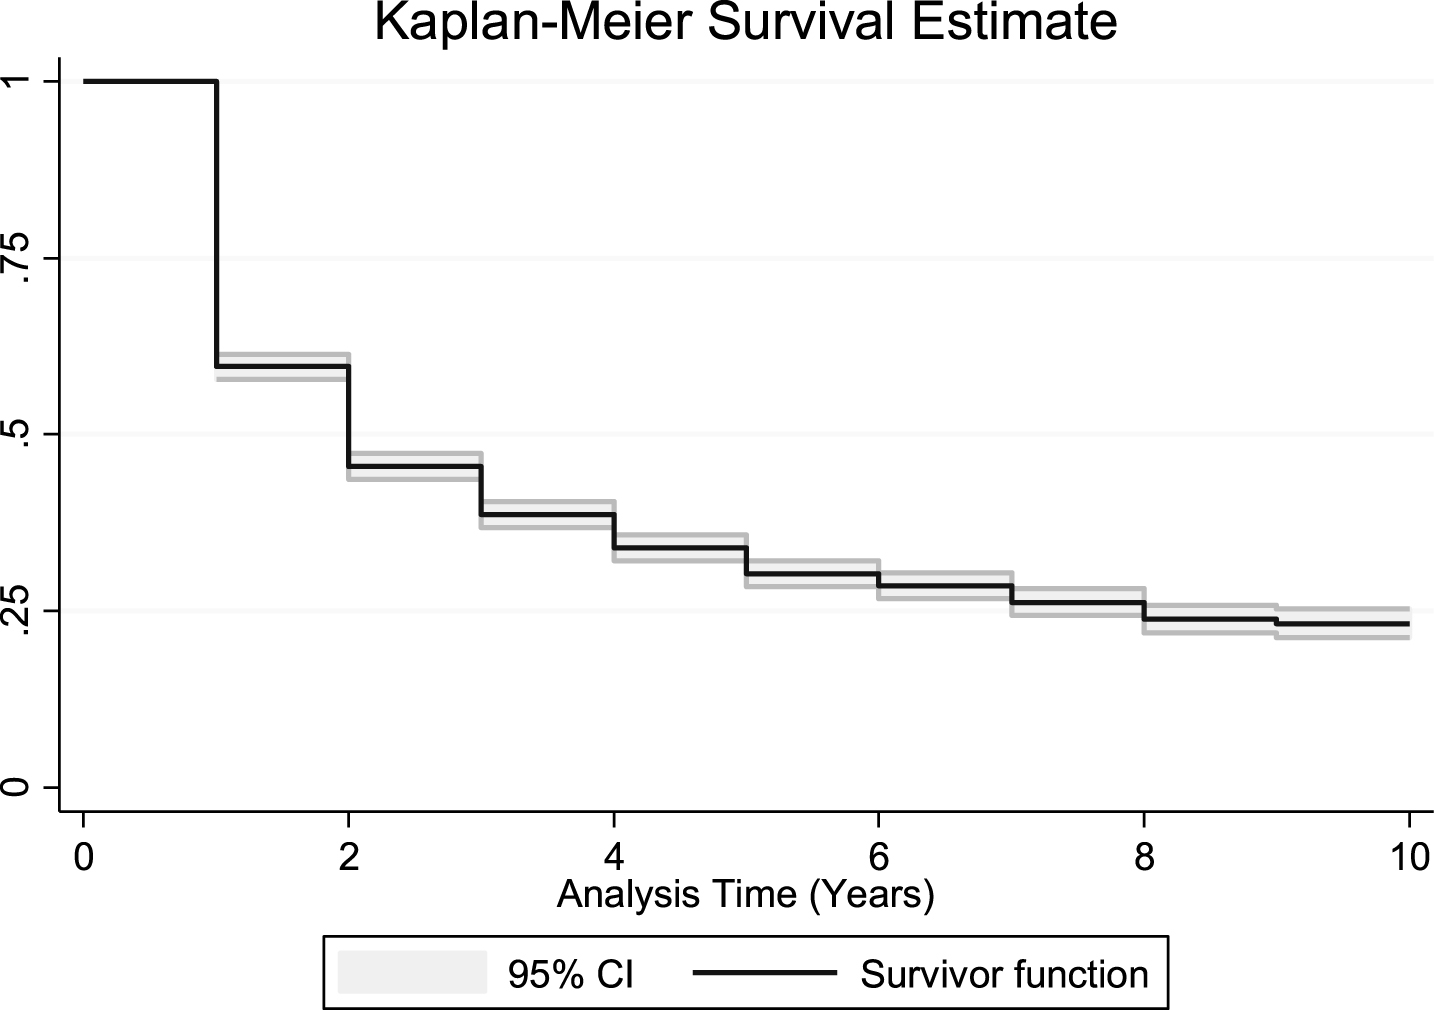 Graph of survivor function for donor survival over time (with 95% CI).